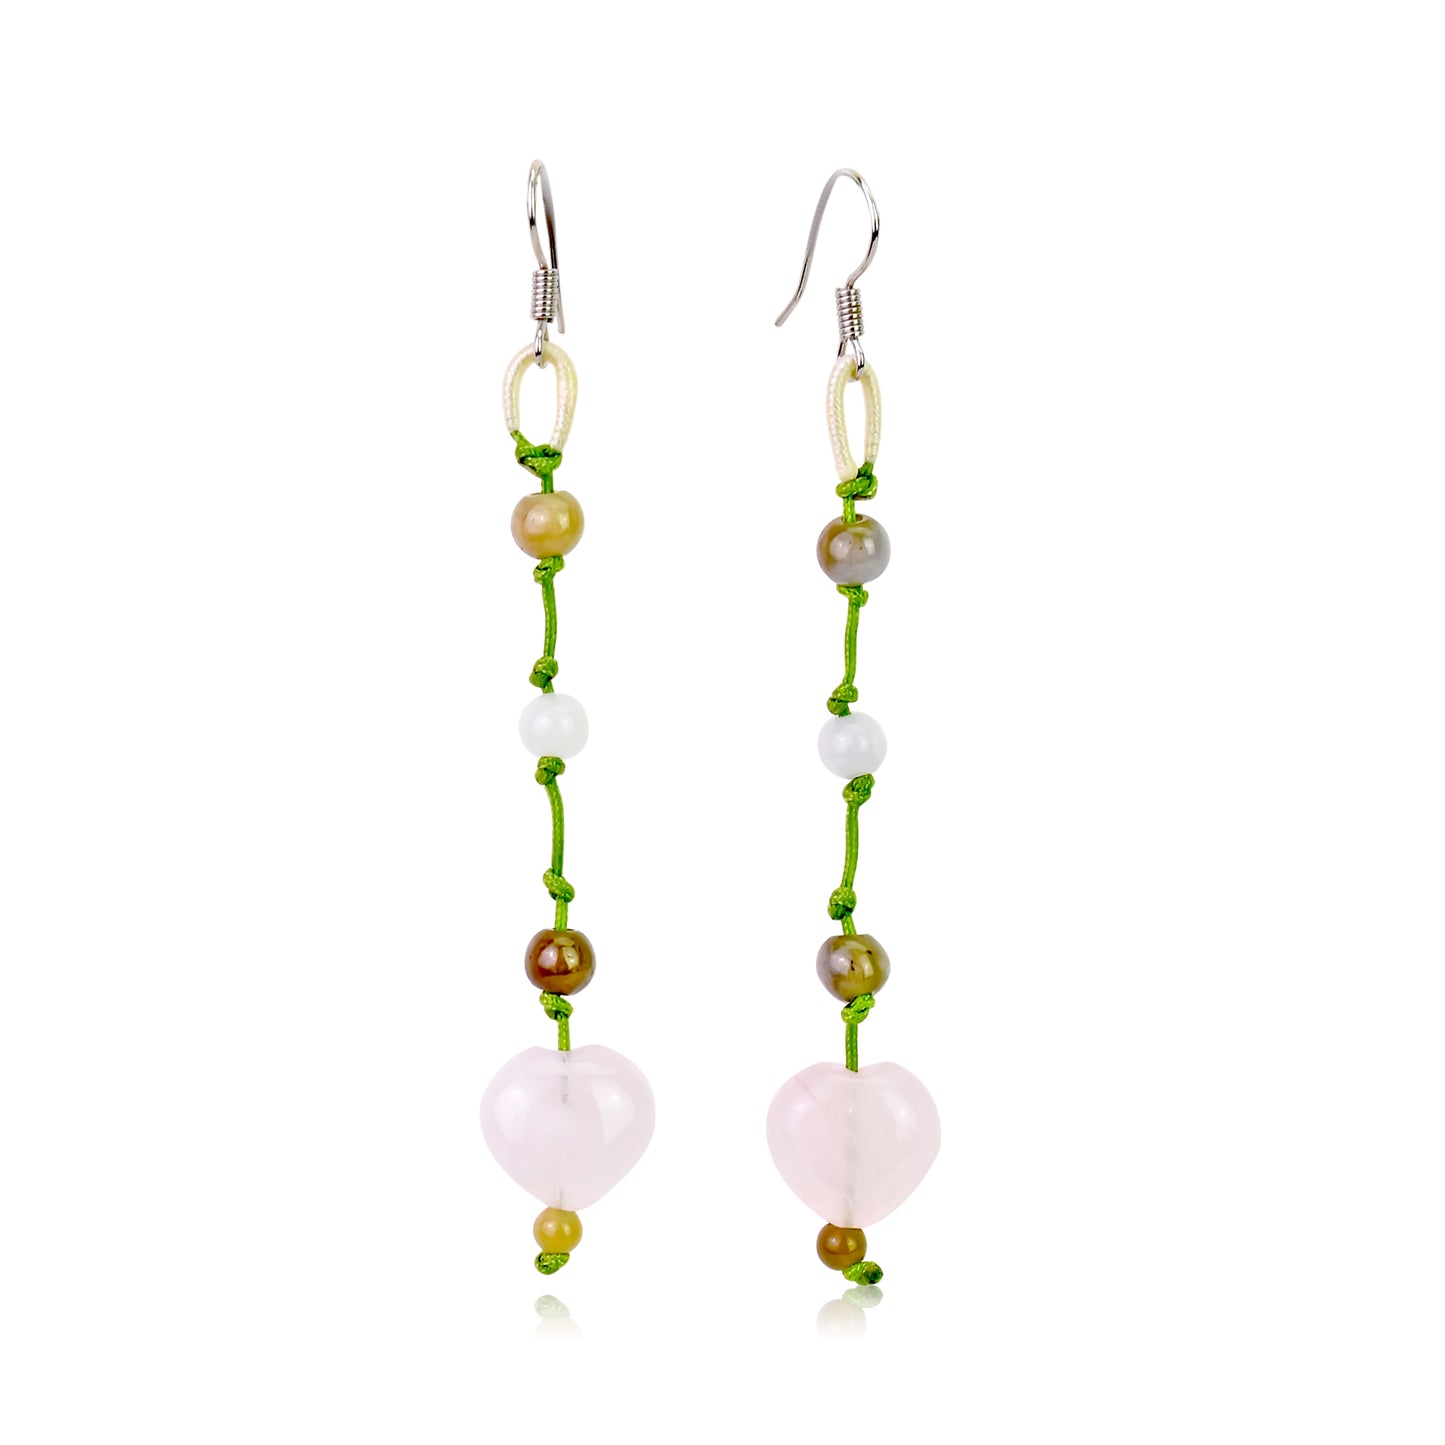 Add a Pop of Color with Rose Quartz Heart Earrings made with Lime Cord